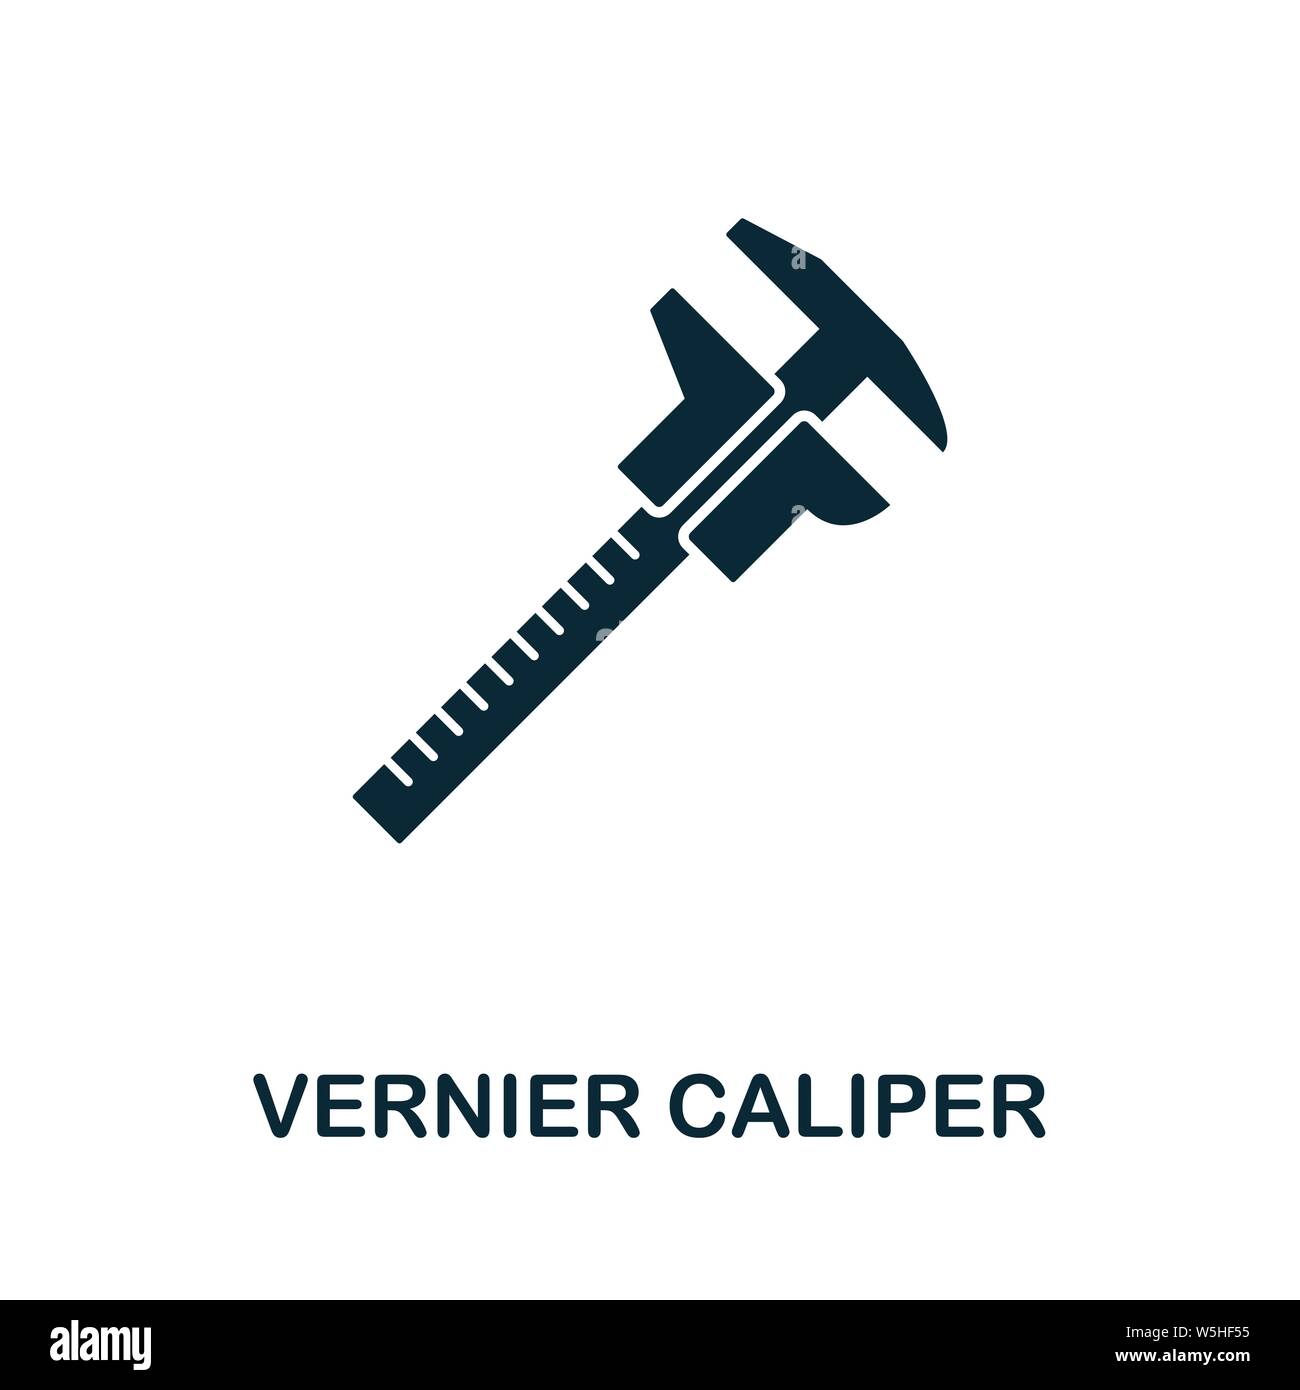 Vernier Caliper vector icon symbol. Creative sign from construction tools icons collection. Filled flat Vernier Caliper icon for computer and mobile Stock Vector